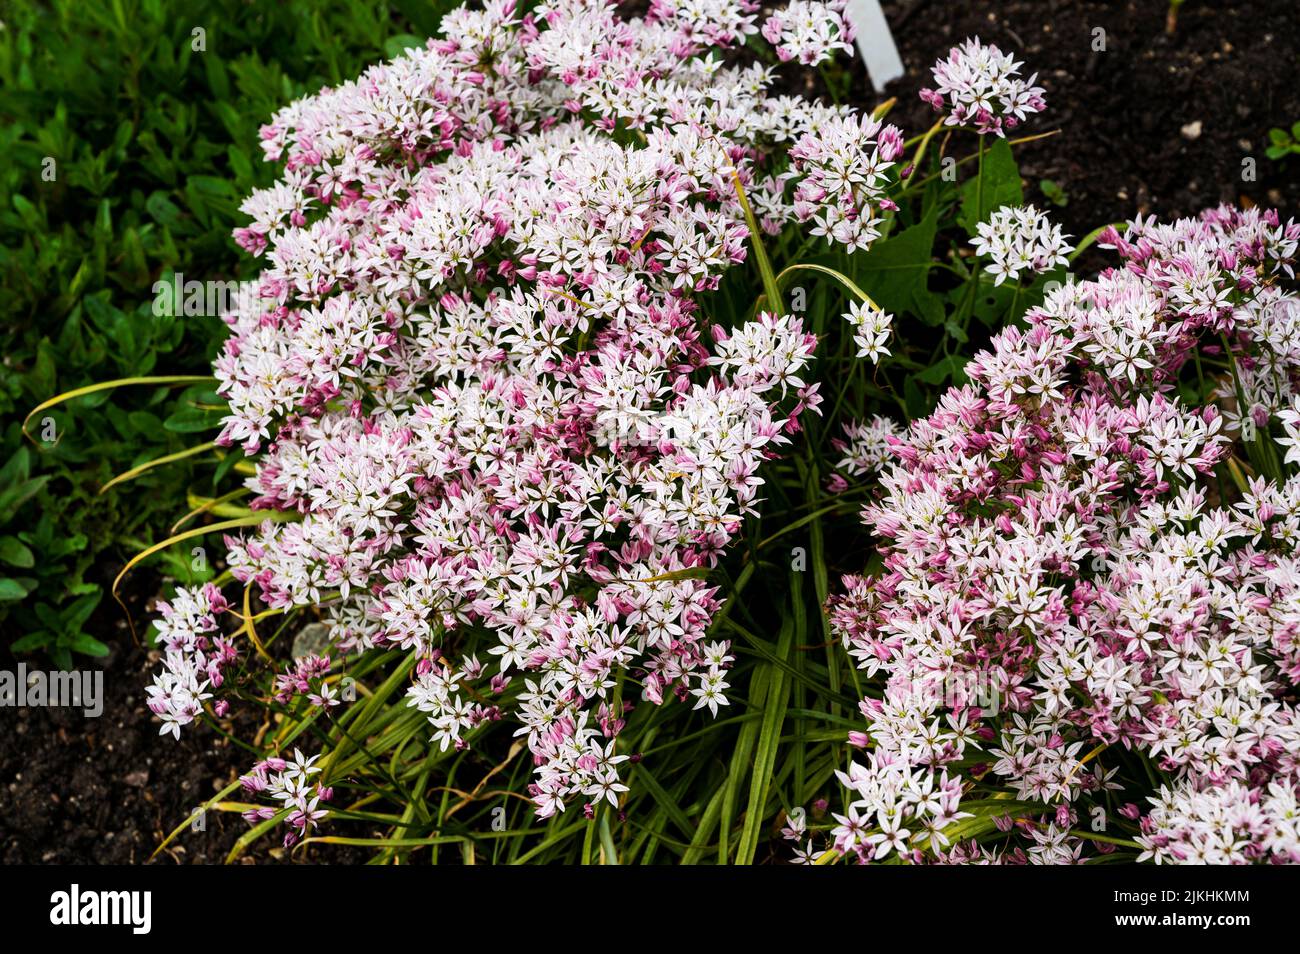 Allium Cameleon, Amaryllidaceae, in spring with pink & white flowers. Stock Photo